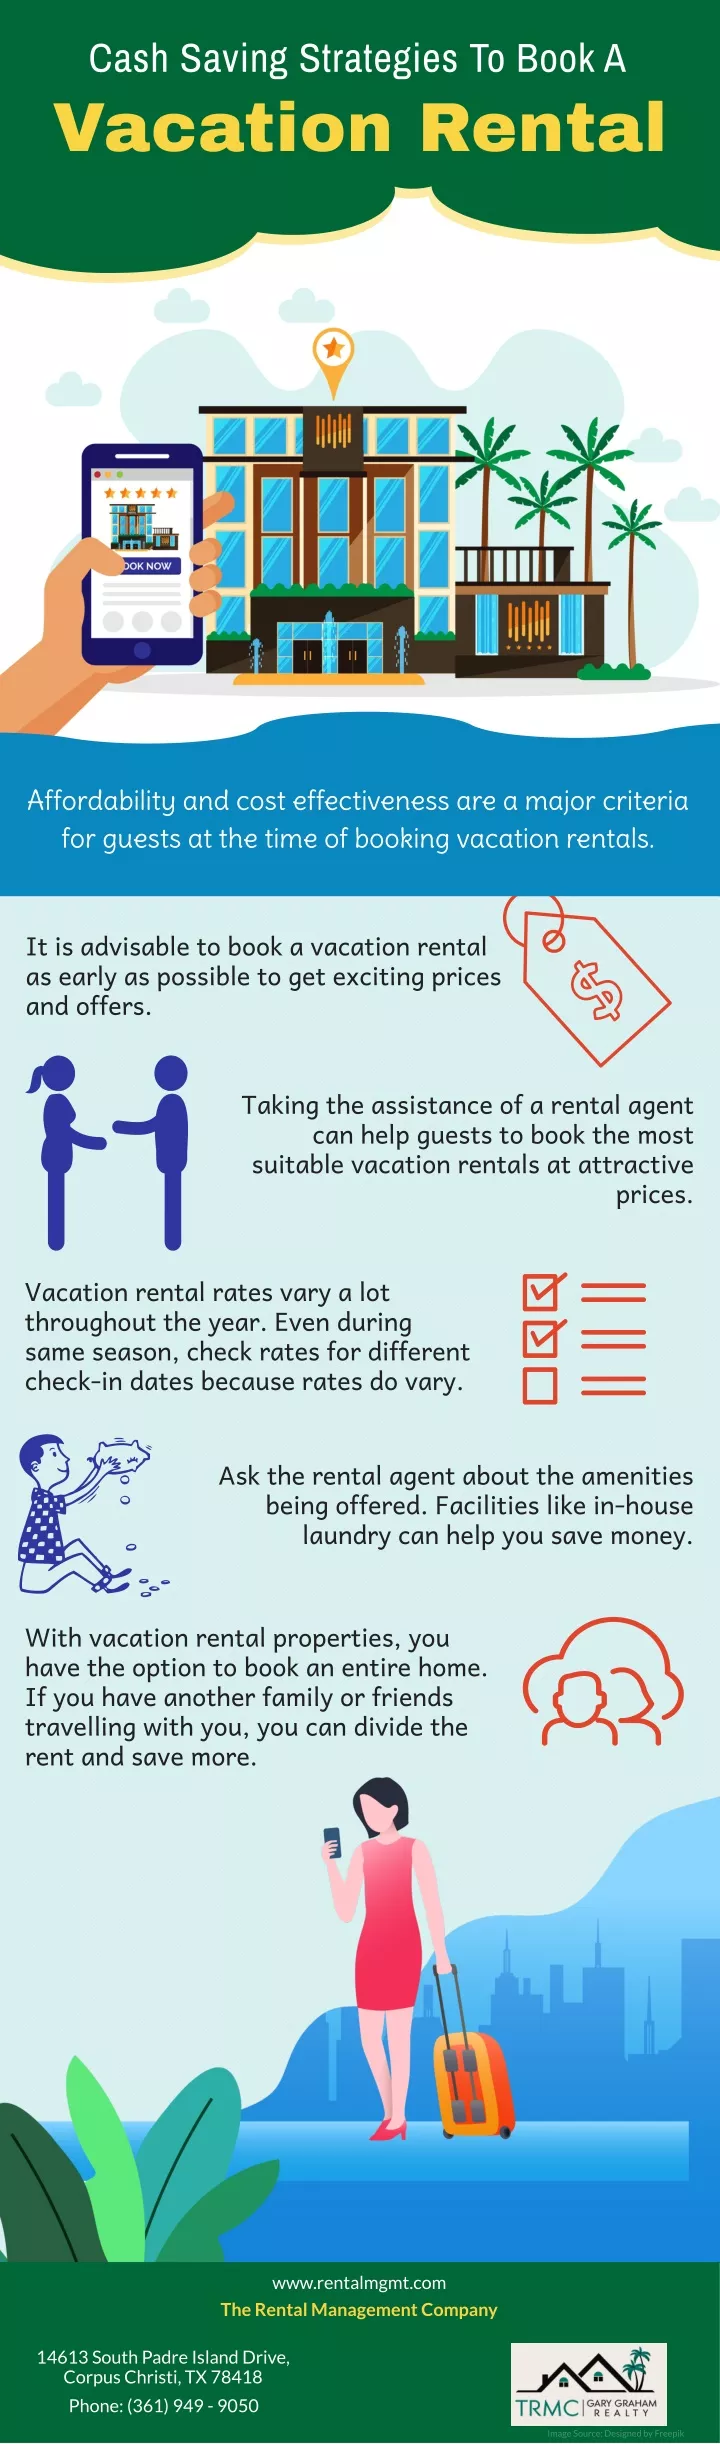 cash saving strategies to book a vacation rental